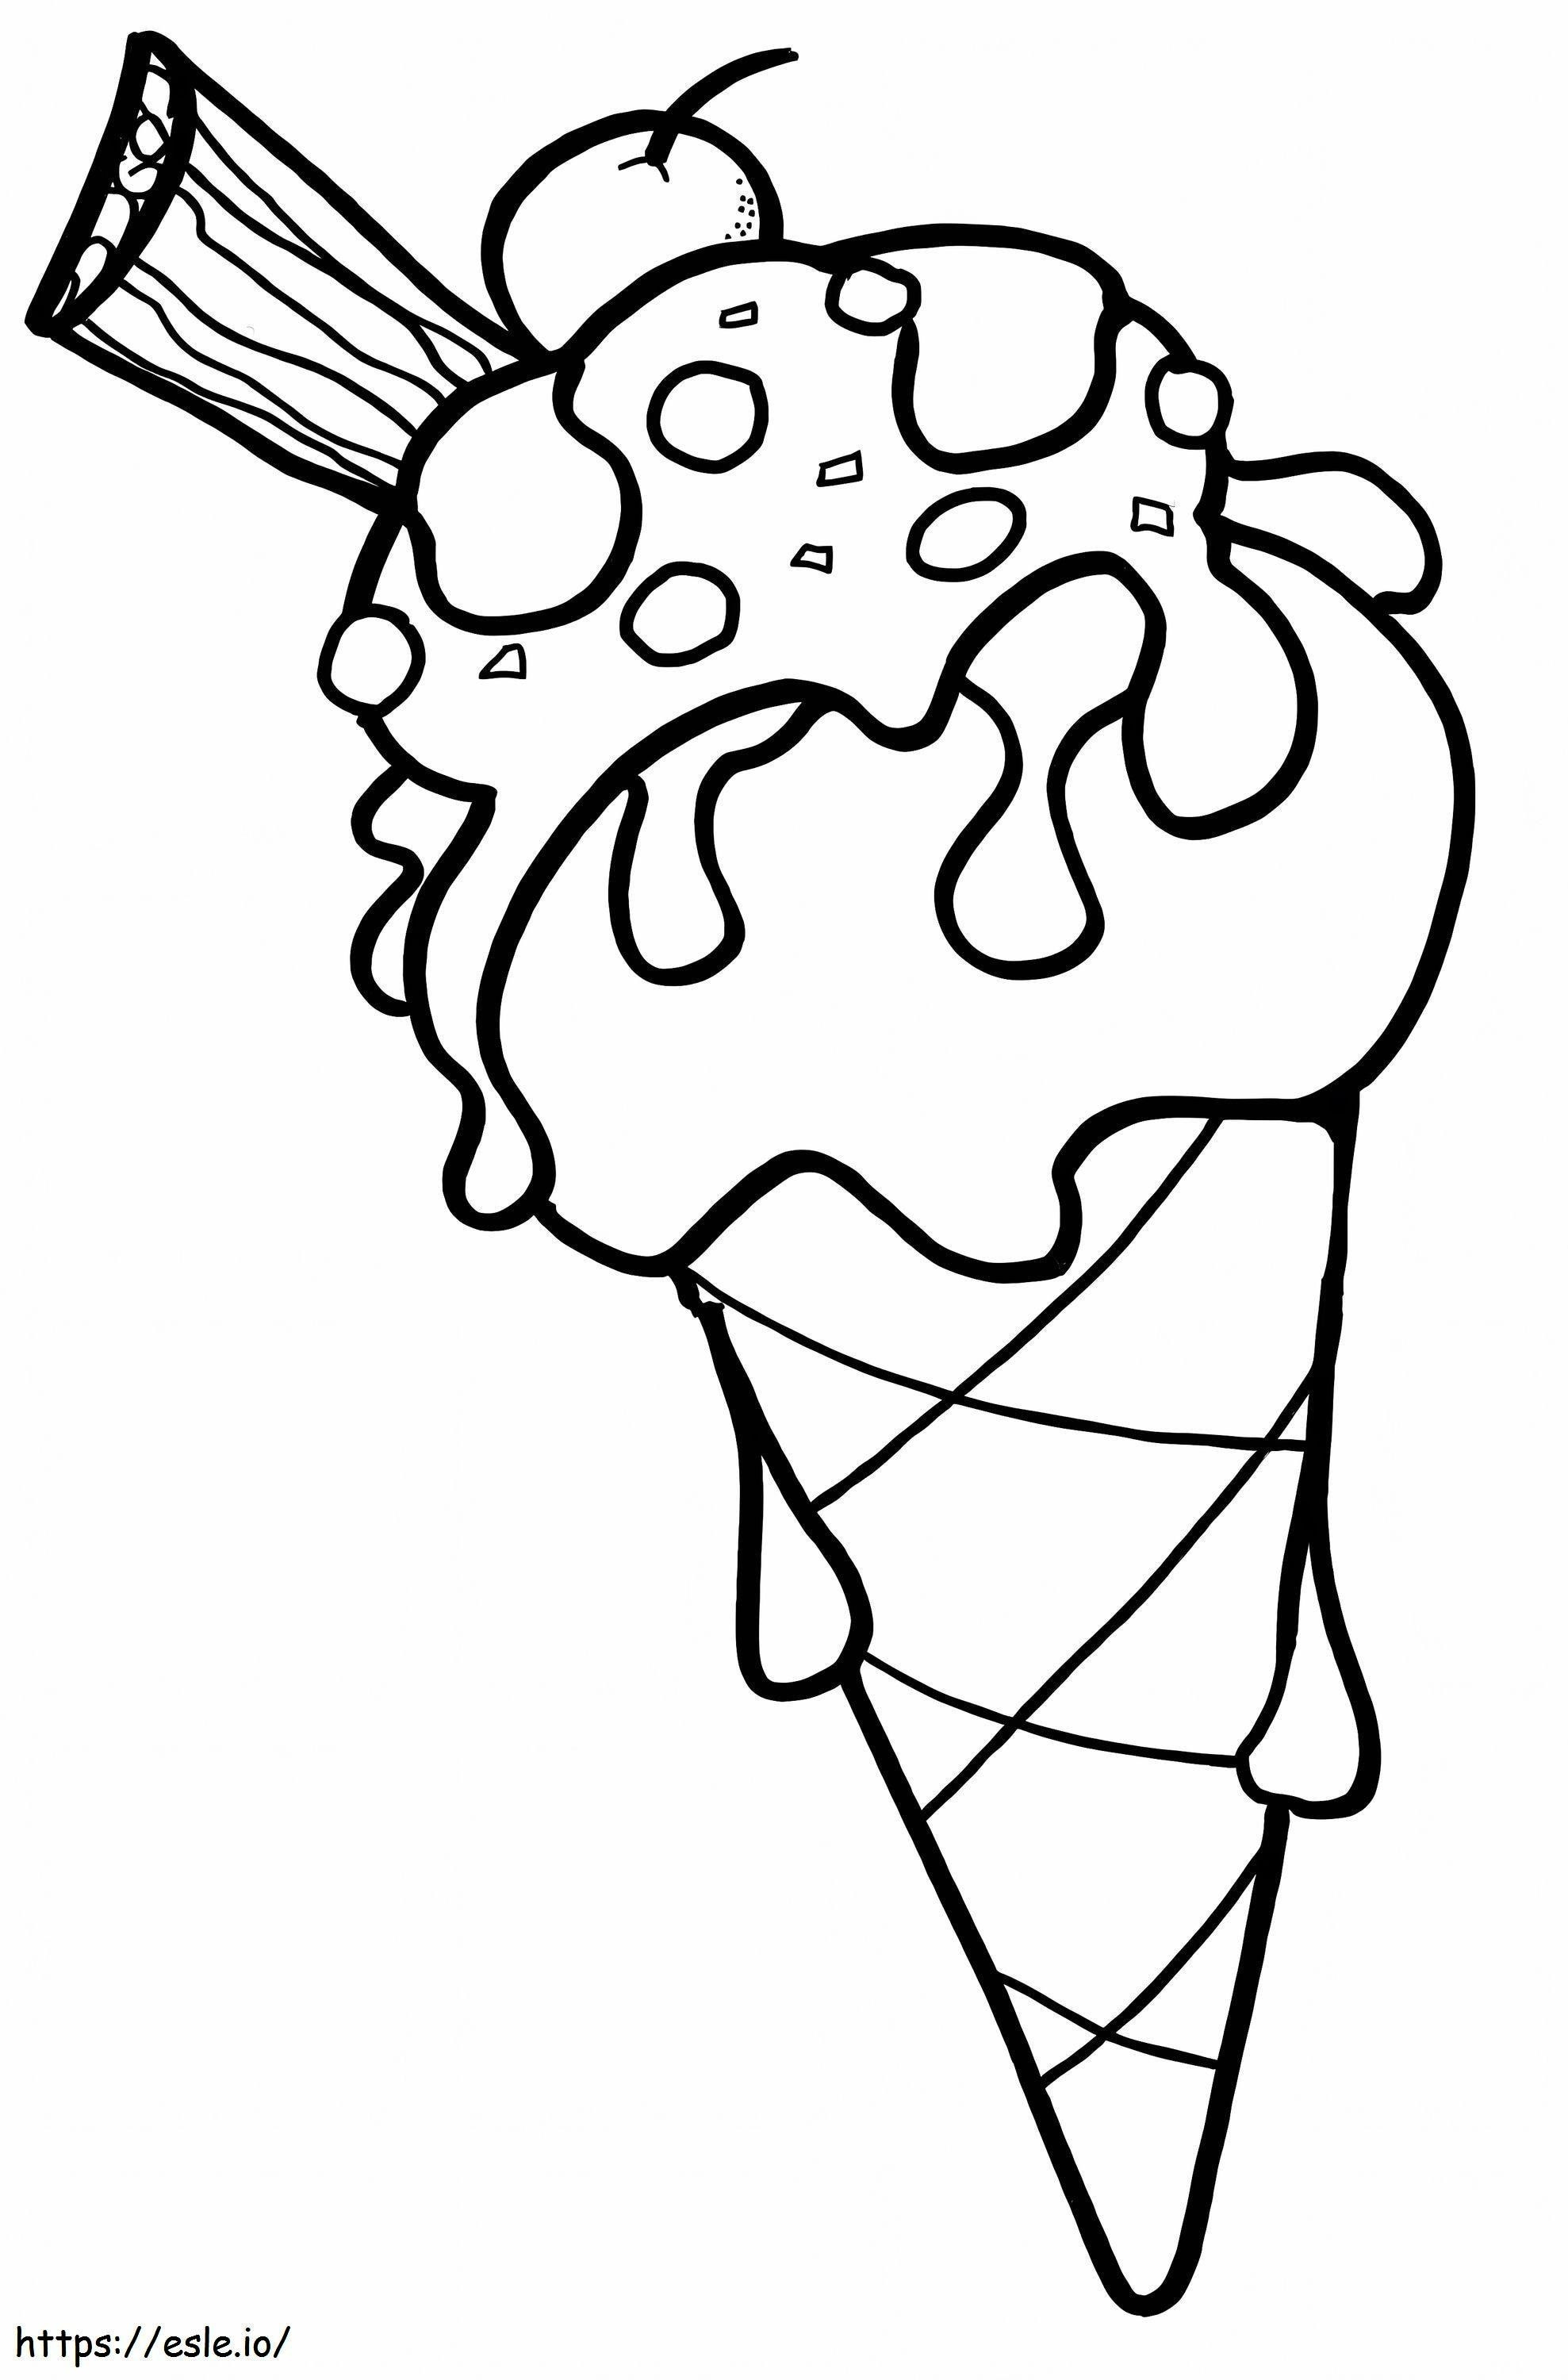 Ice Cream 3 coloring page